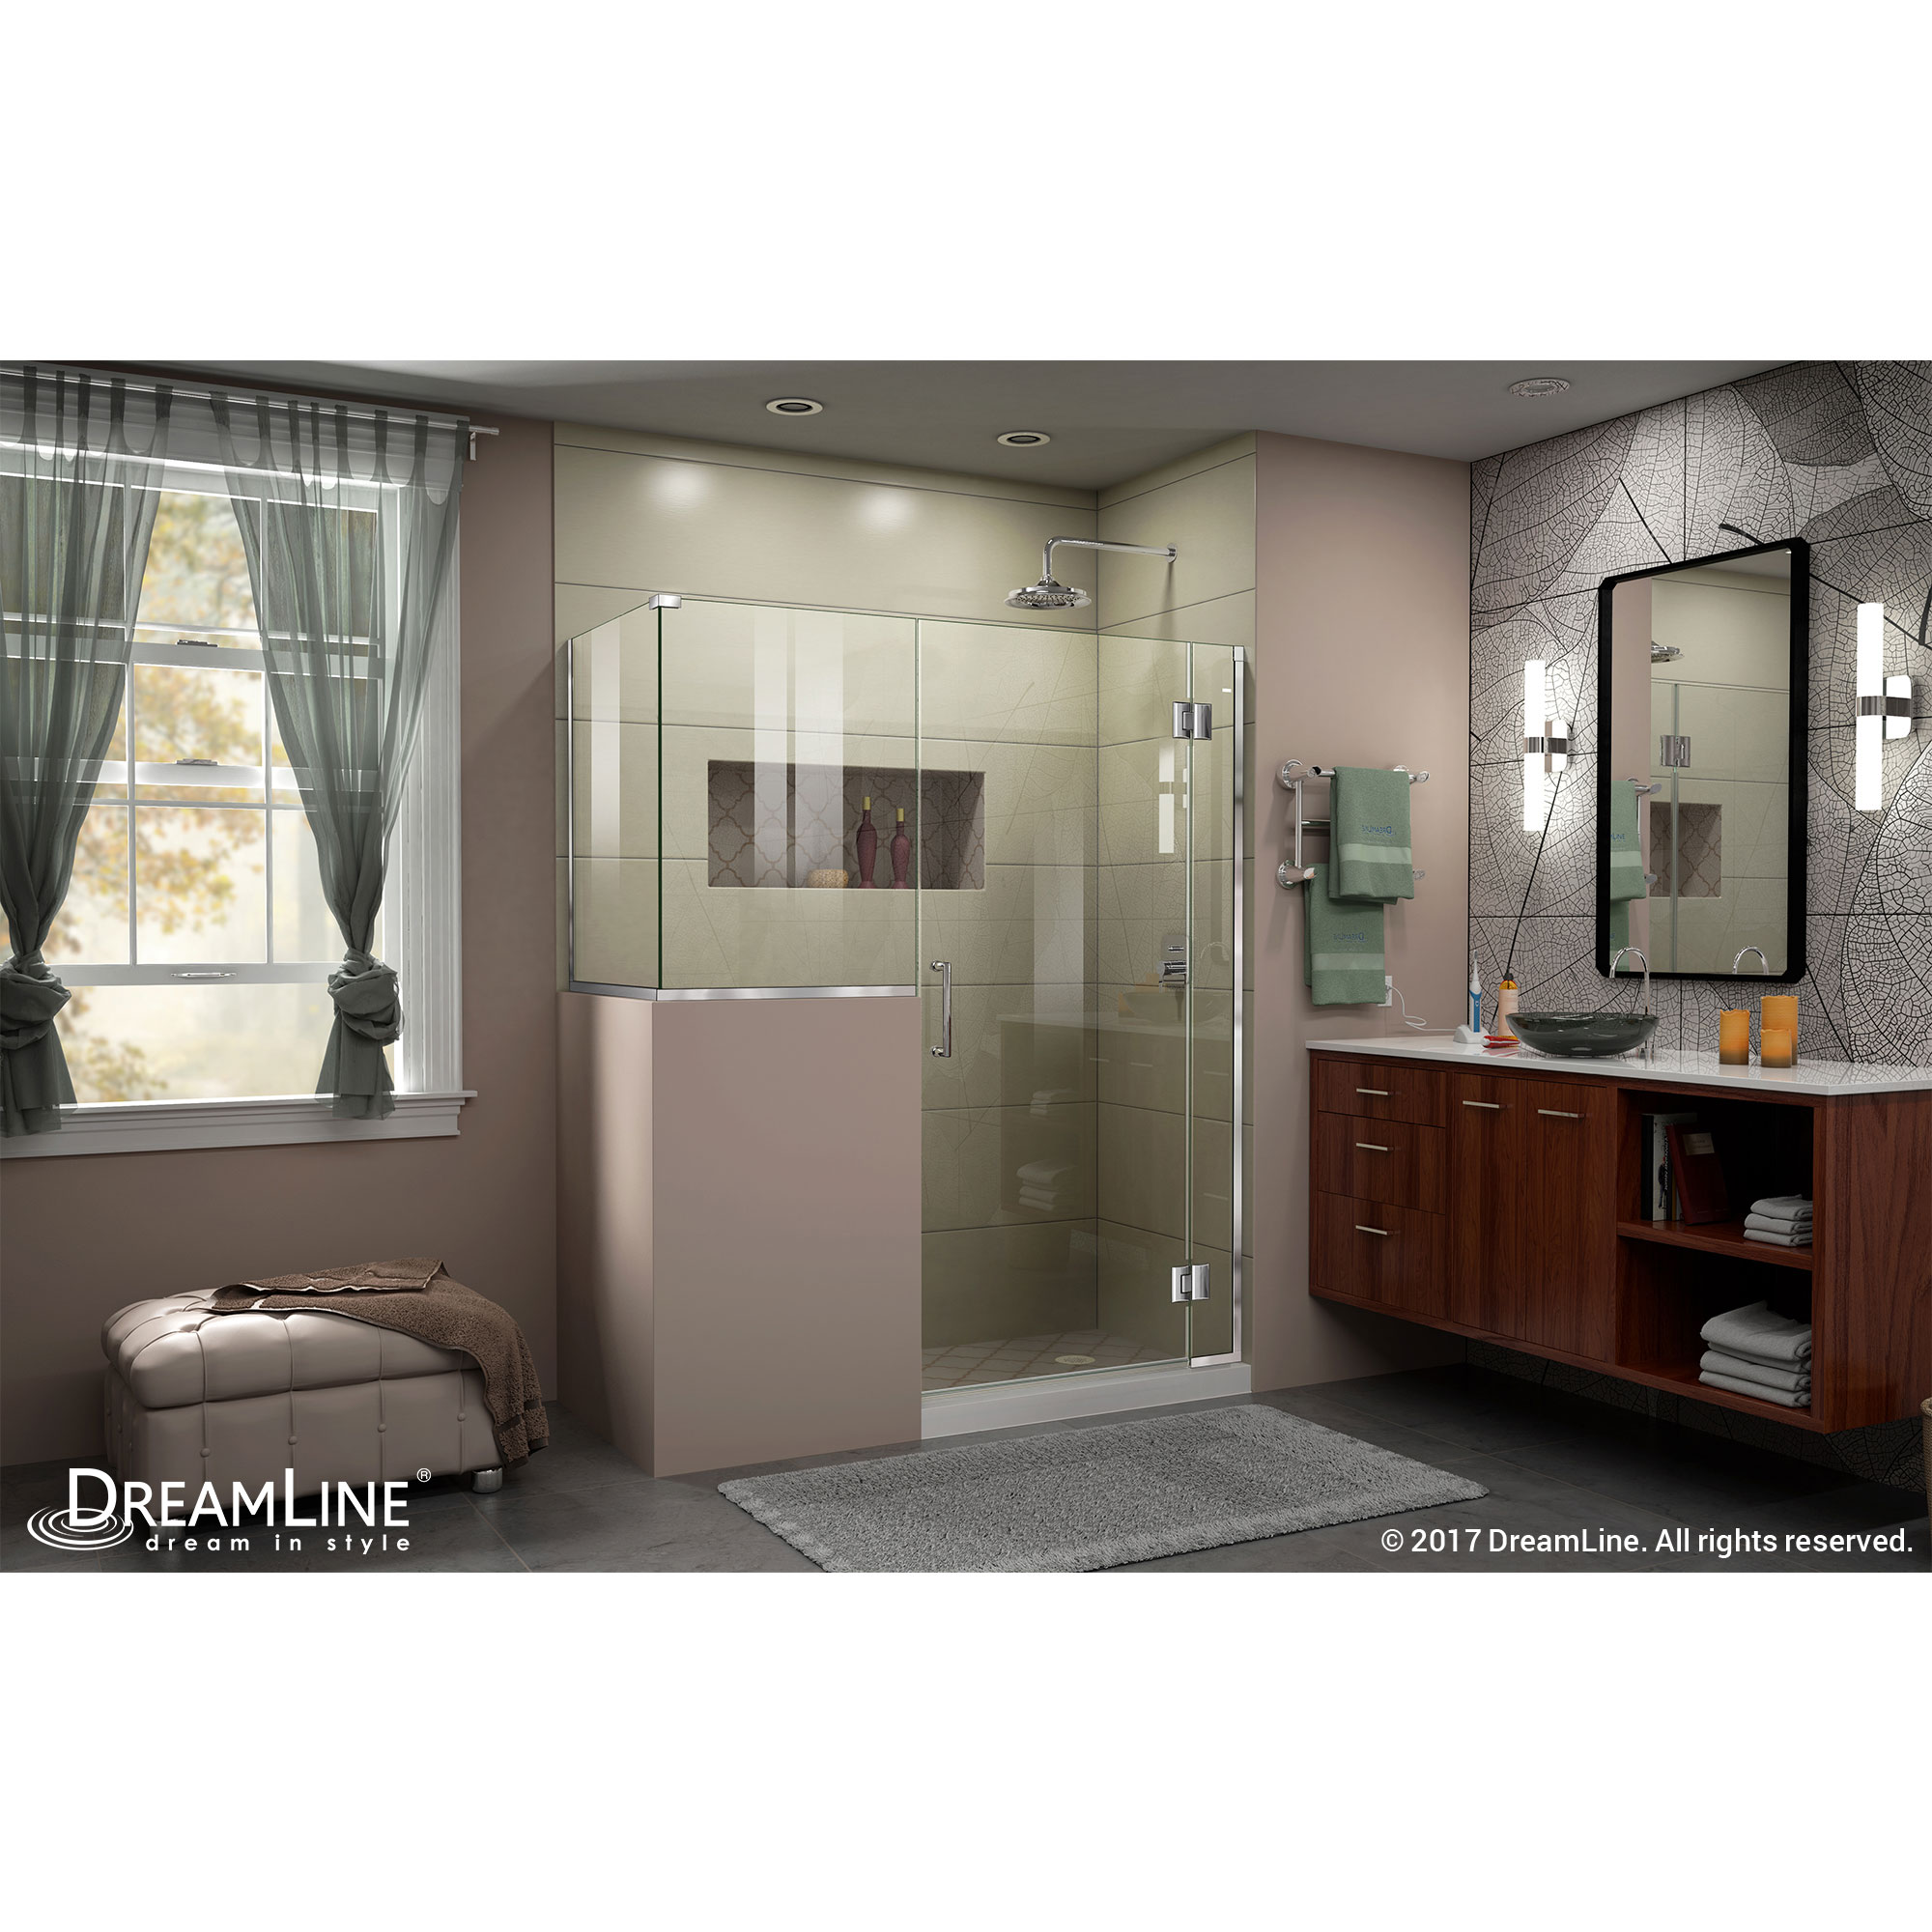 DreamLine Unidoor-X 59 in. W x 36 3/8 in. D x 72 in. H Frameless Hinged Shower Enclosure in Chrome